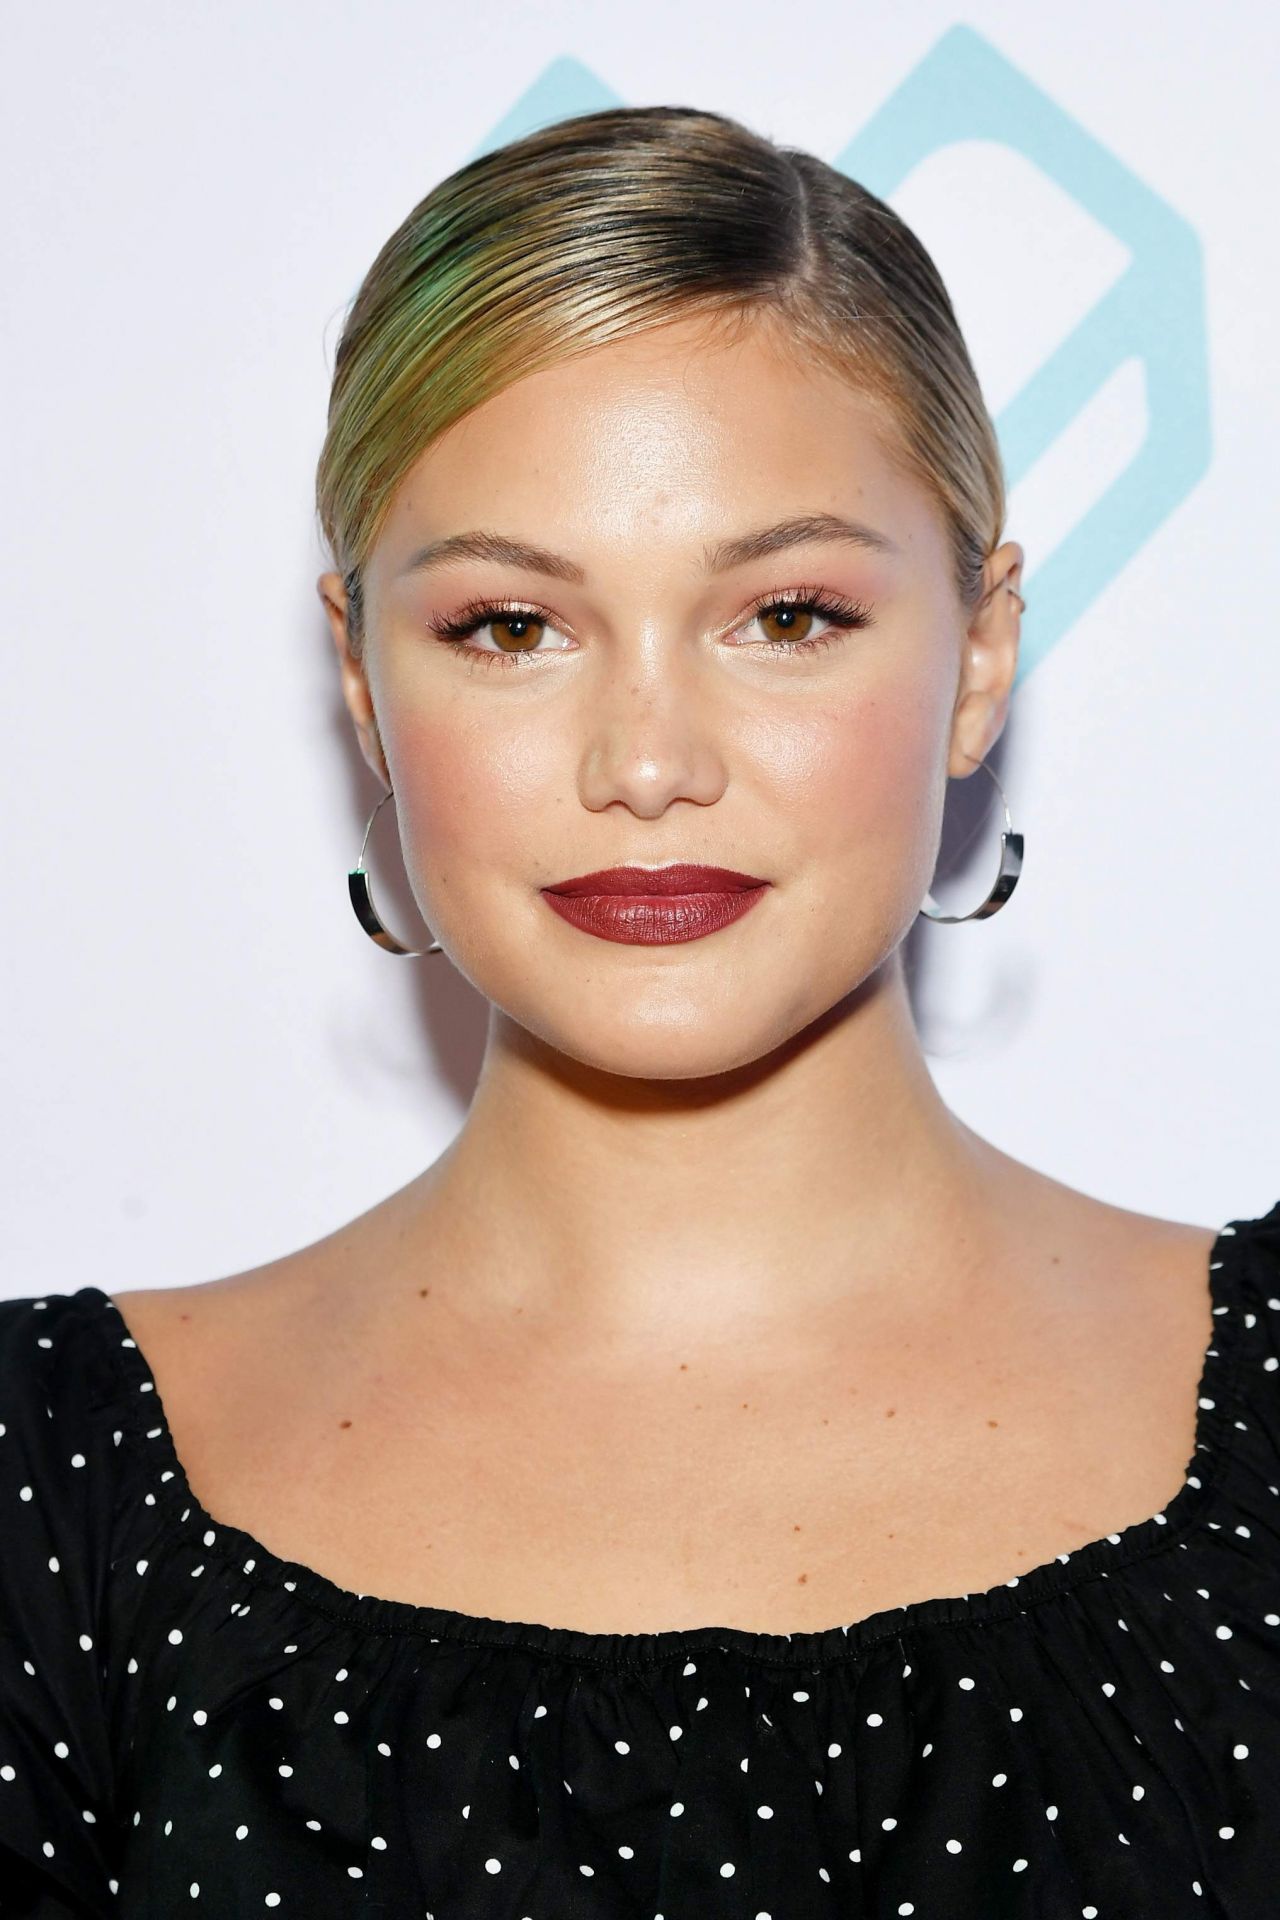 Olivia Holt Comic Con 2018 Variety Portrait Wallpapers